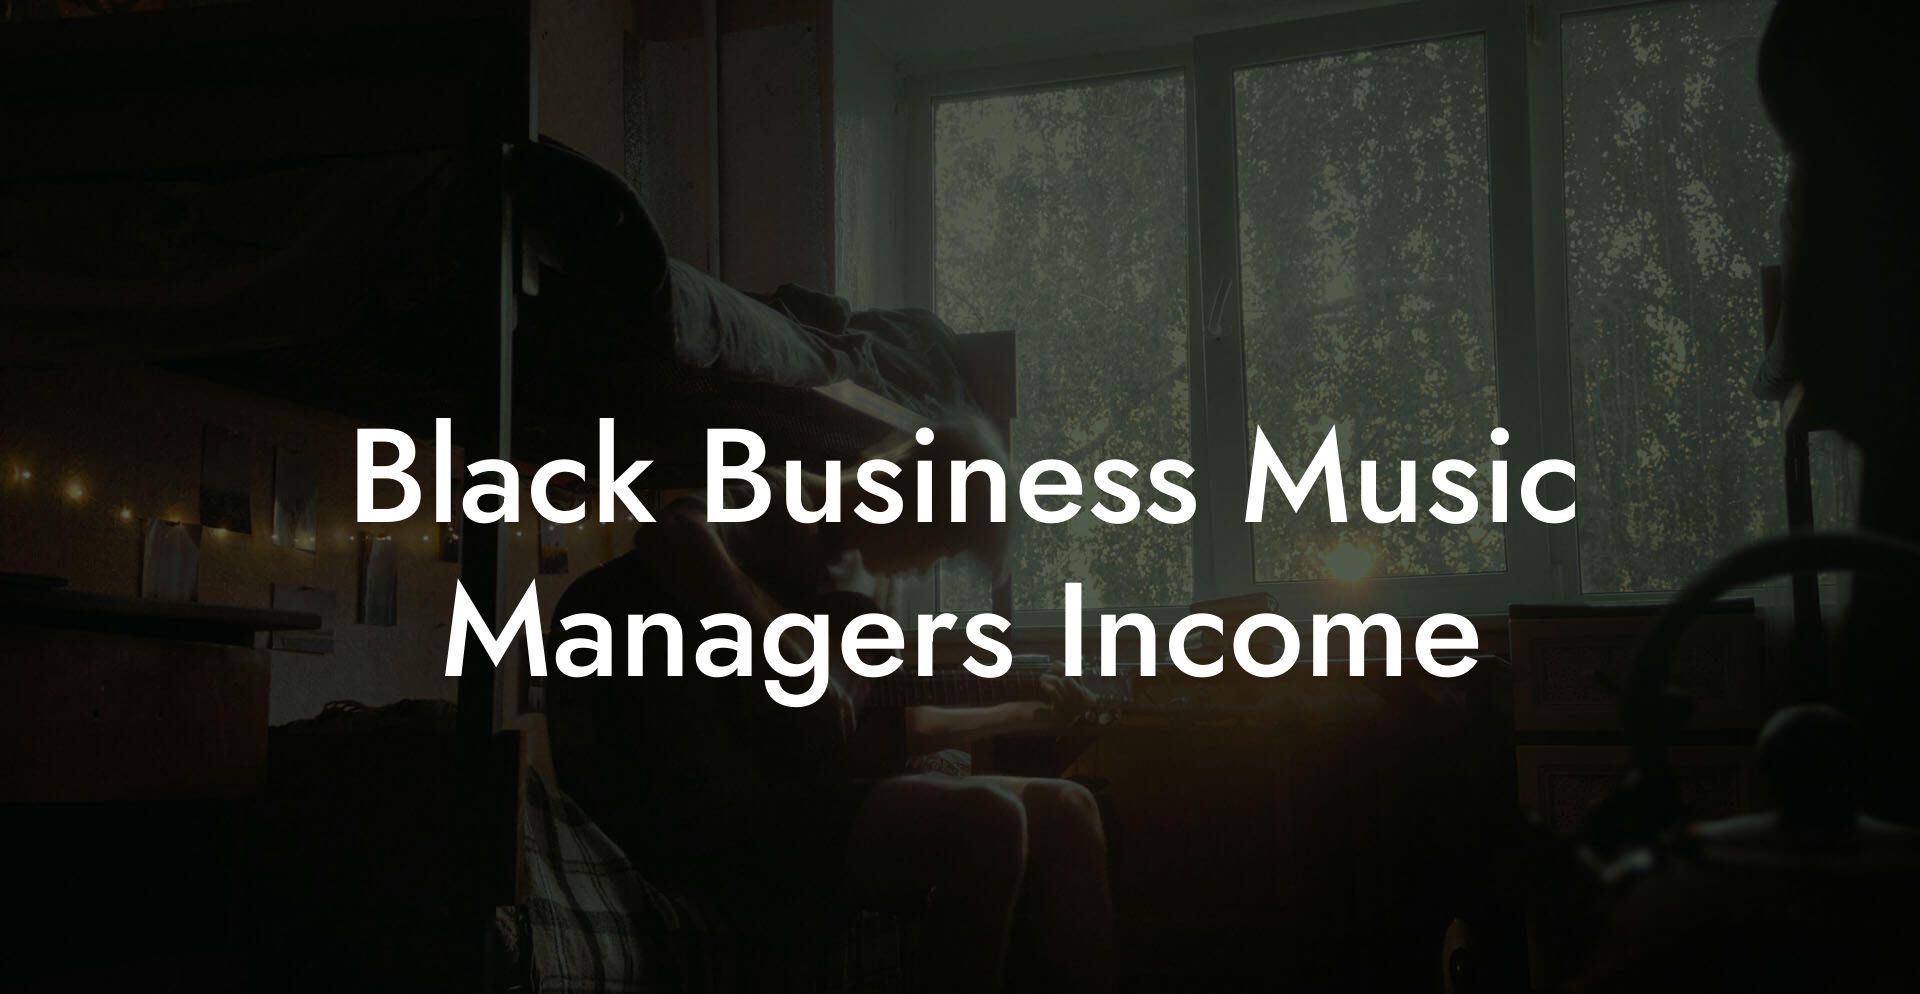 Black Business Music Managers Income